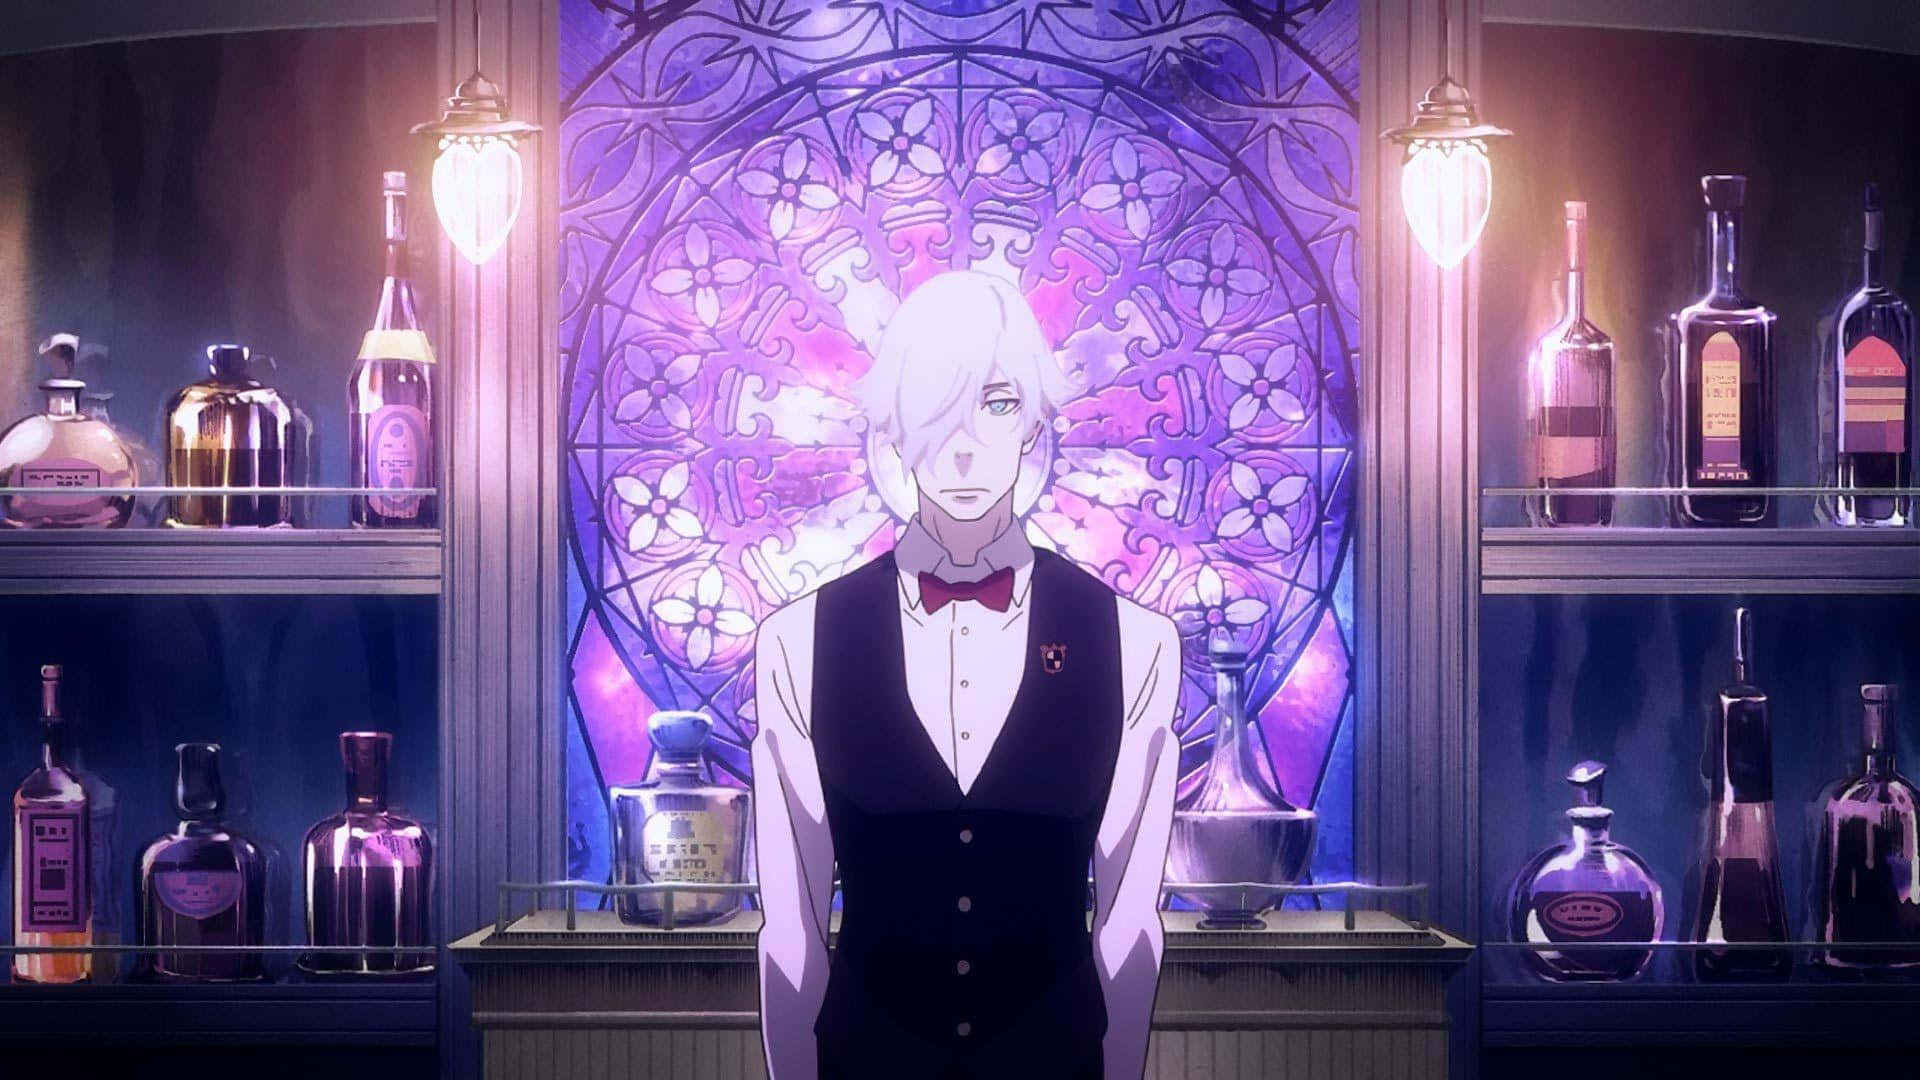 Two powerful figures collide in this nightmarish scene from Death Parade